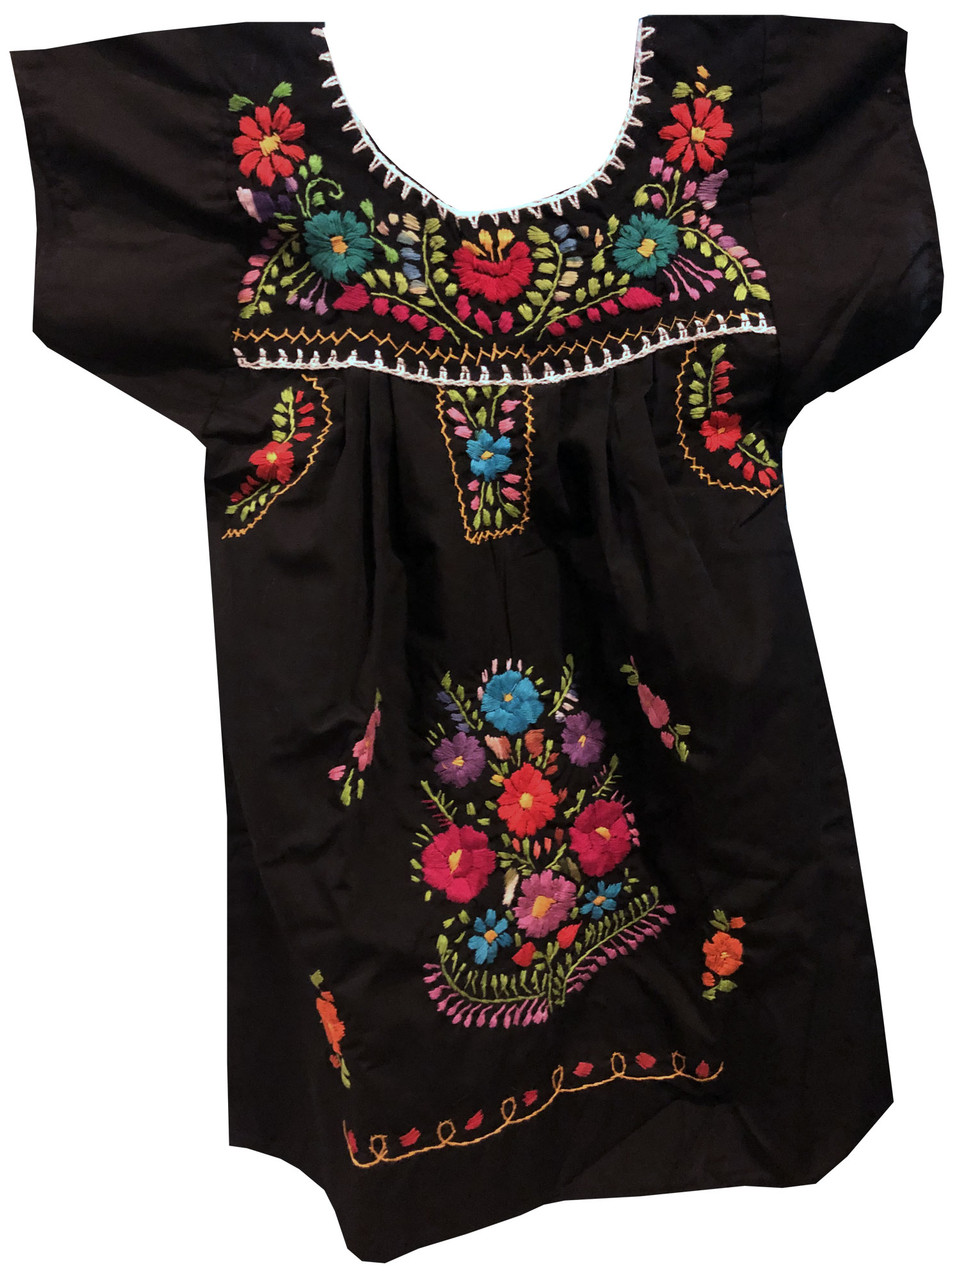 Girl's Mexican Fiesta Embroidered Puebla Dress Black Size 3 - My Mercado  Mexican Imports